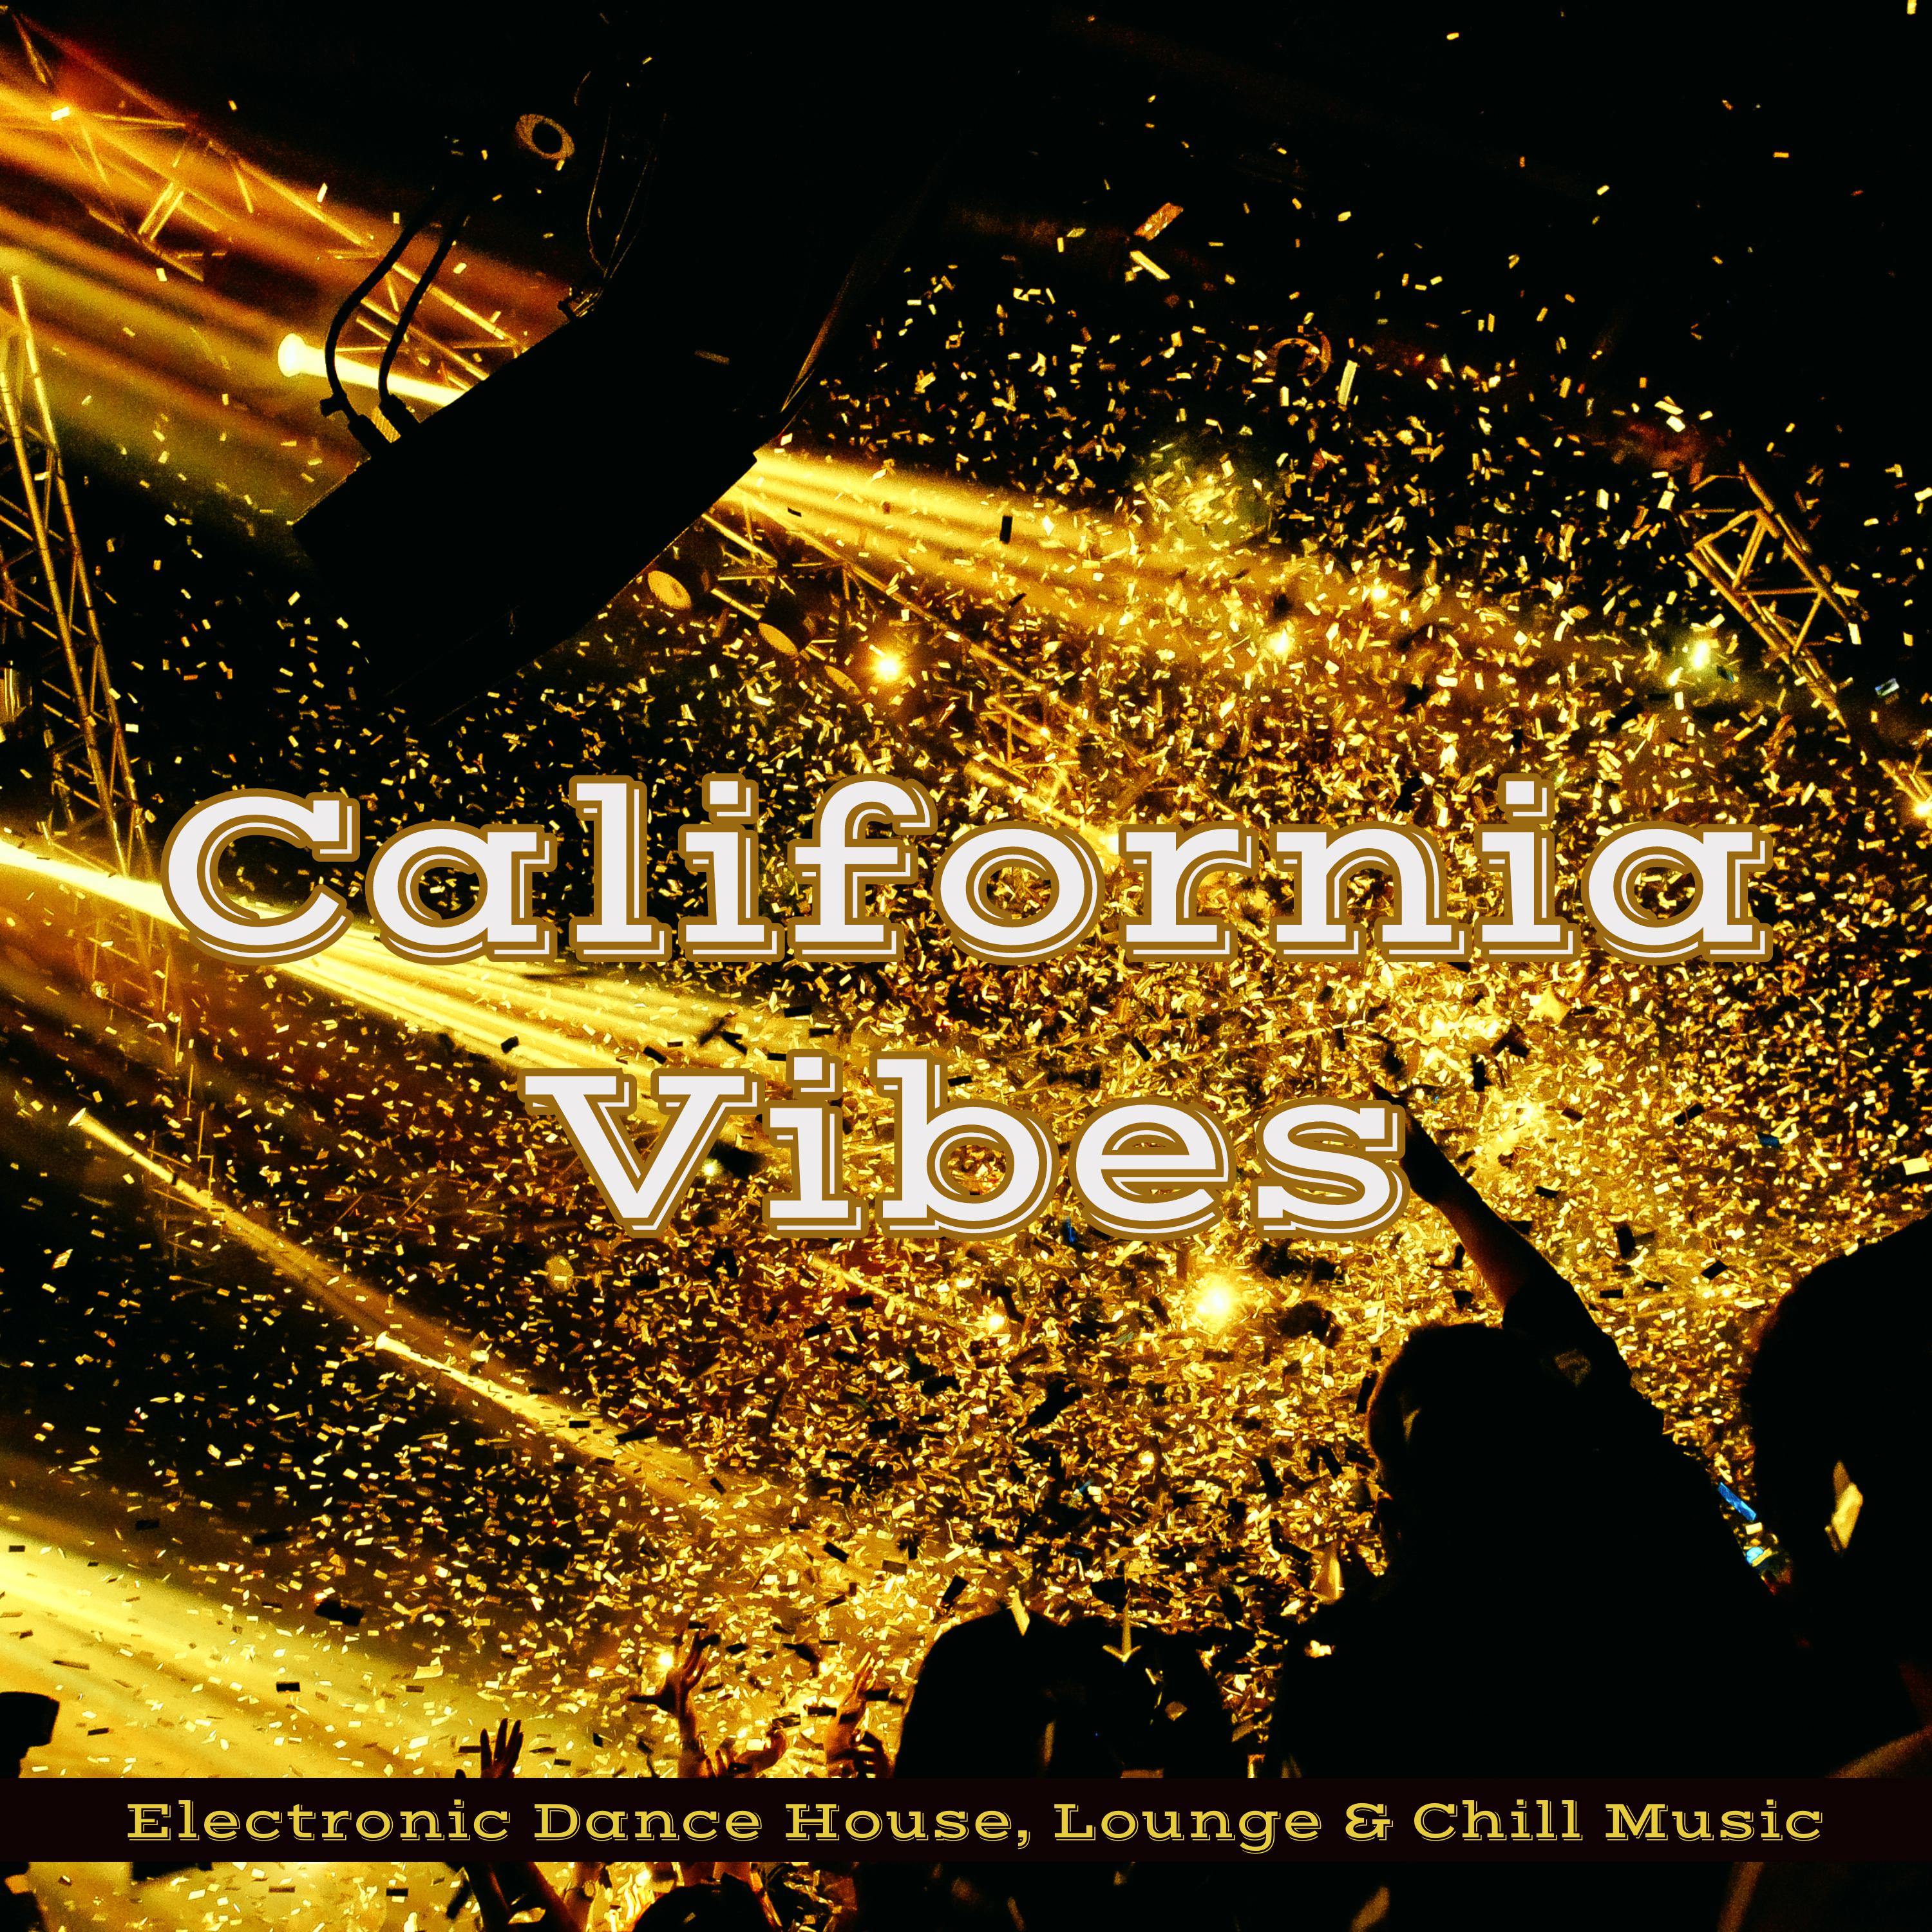 California Vibes – Electronic Dance House, Lounge & Chill Music